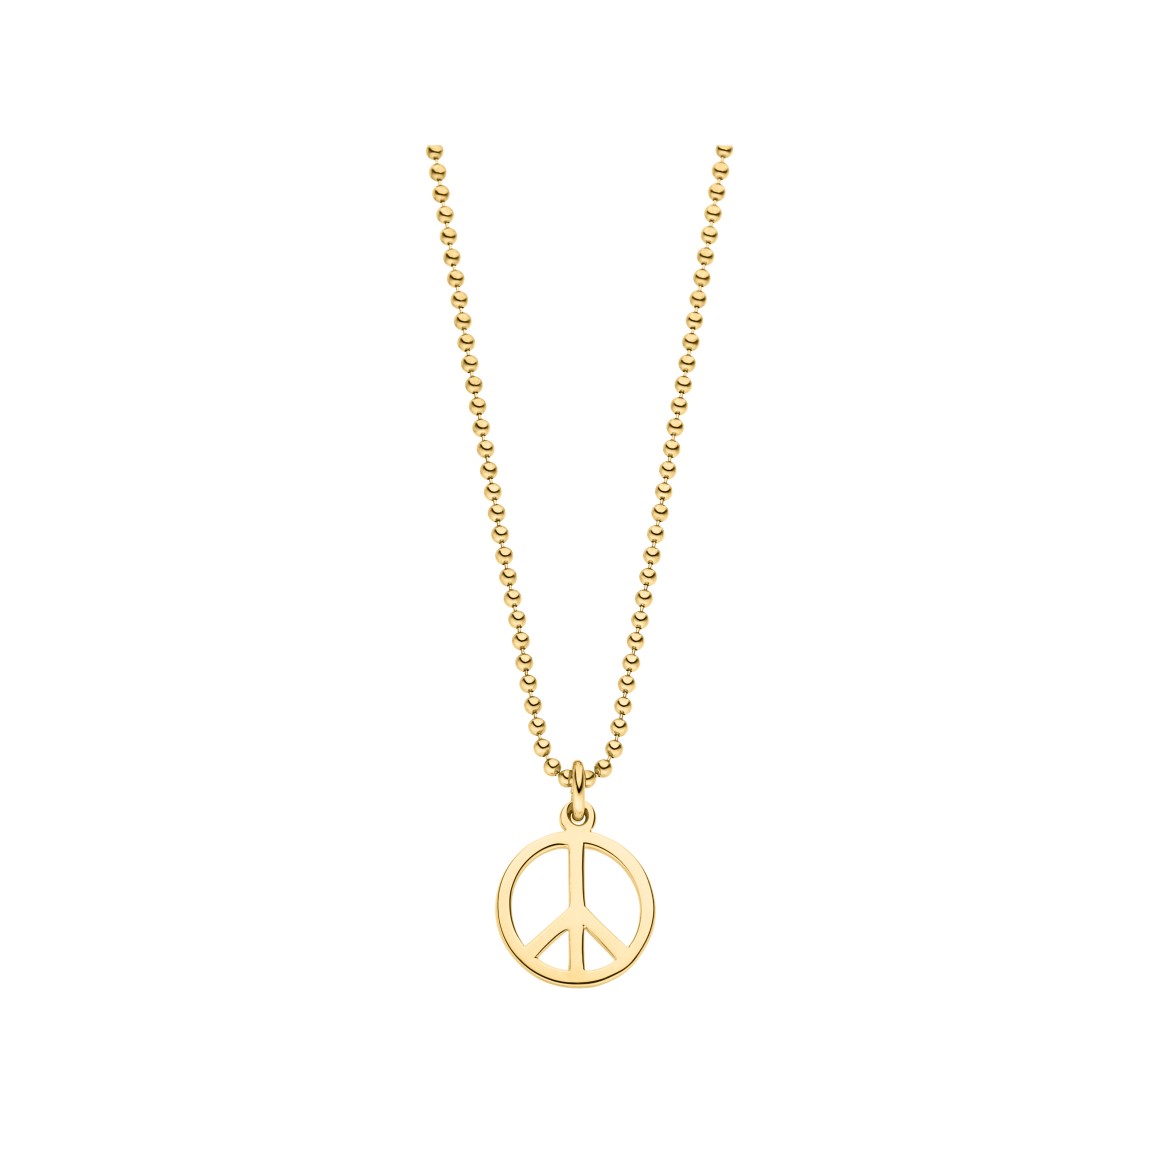 ladies peace necklace sterling silver gold-plated